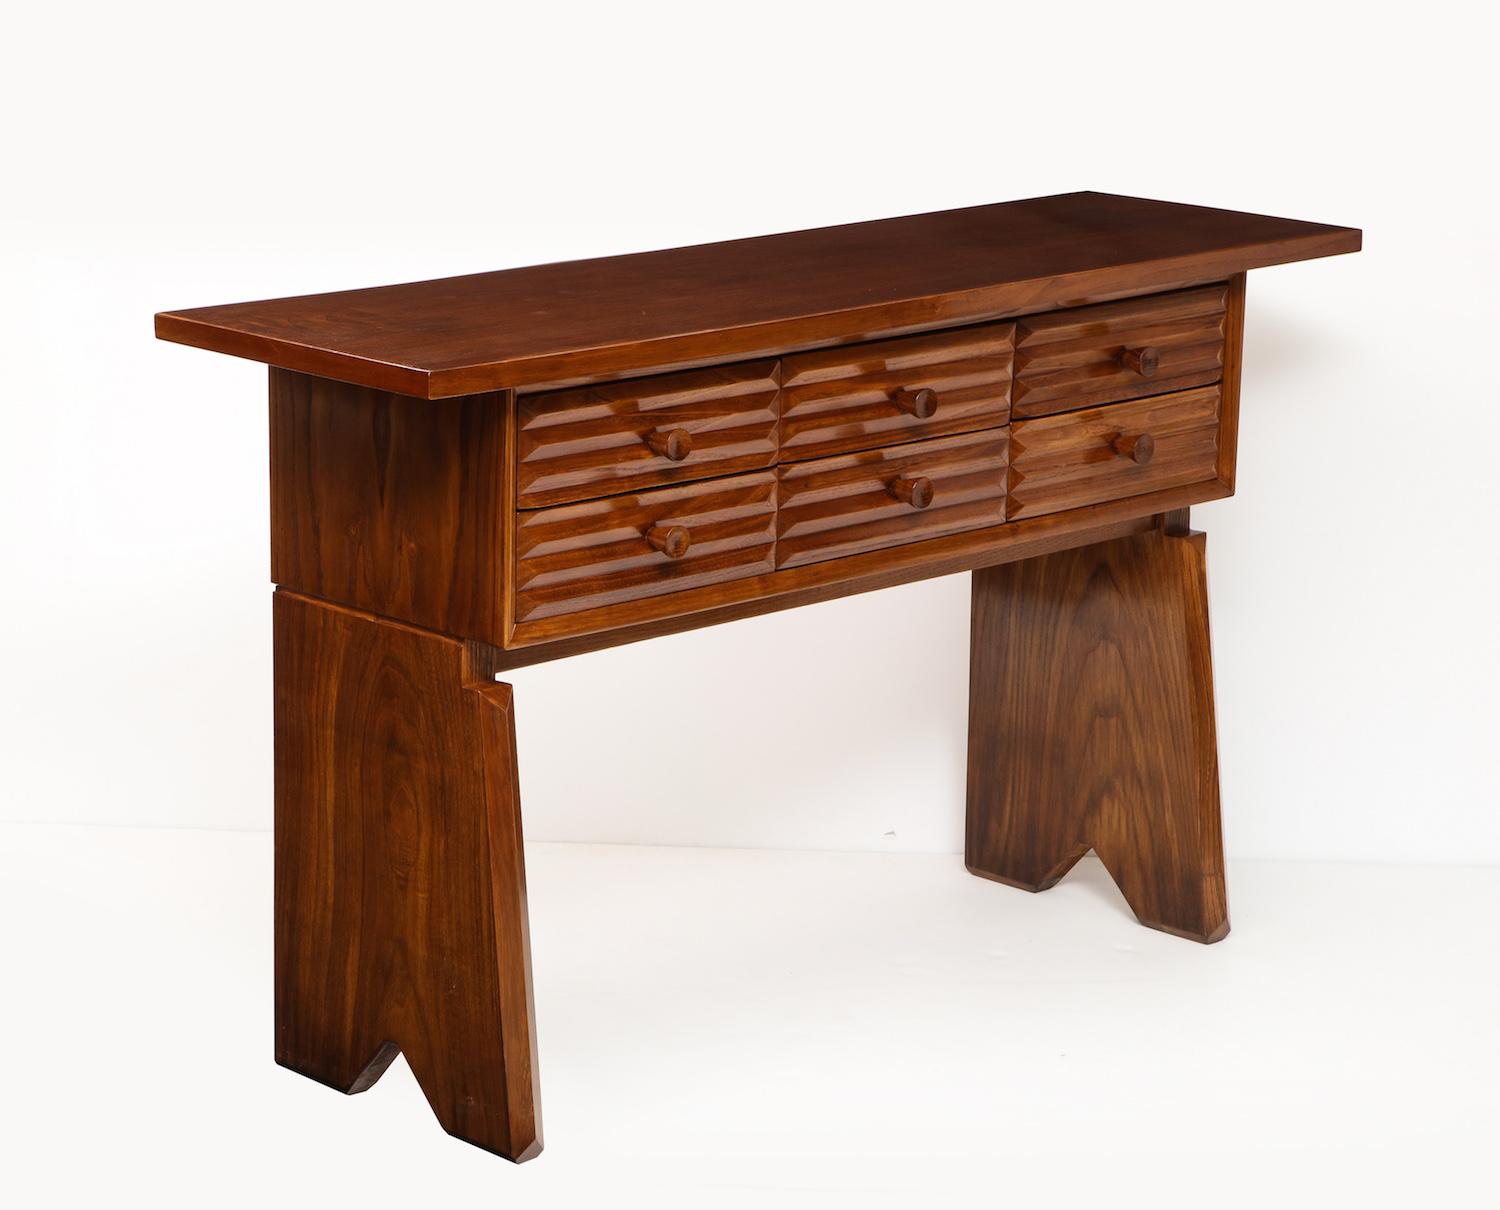 Rare console table/ server by Paolo Buffa. Produced by Serafino Arrighi, Cantú. Table features ash veneer, with carved wood details, over-hanging slab wood top. 6 drawers with craved front relief and conical wood pulls. A fantastic example of